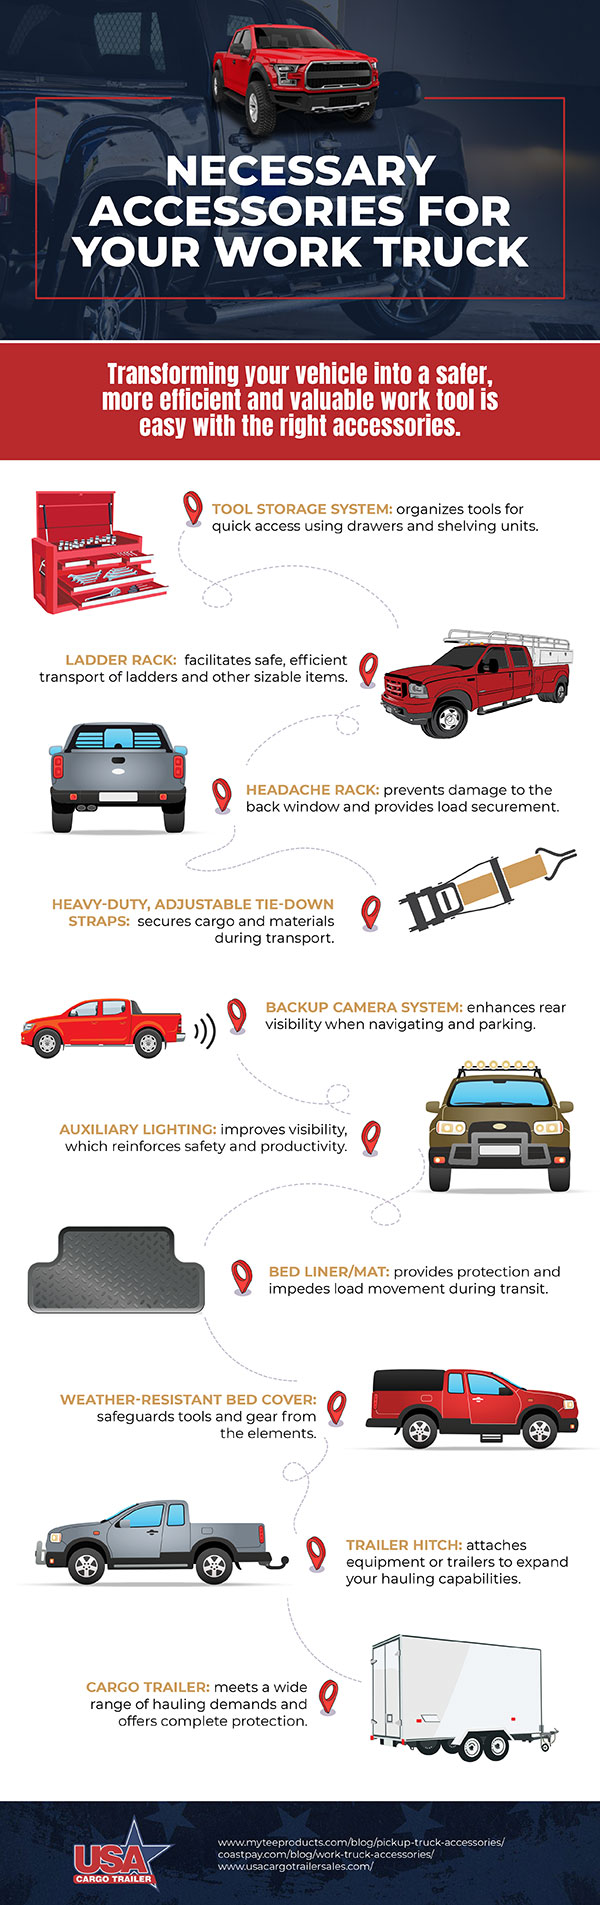 necessary accessories for your work truck usa cargo accessories infographic